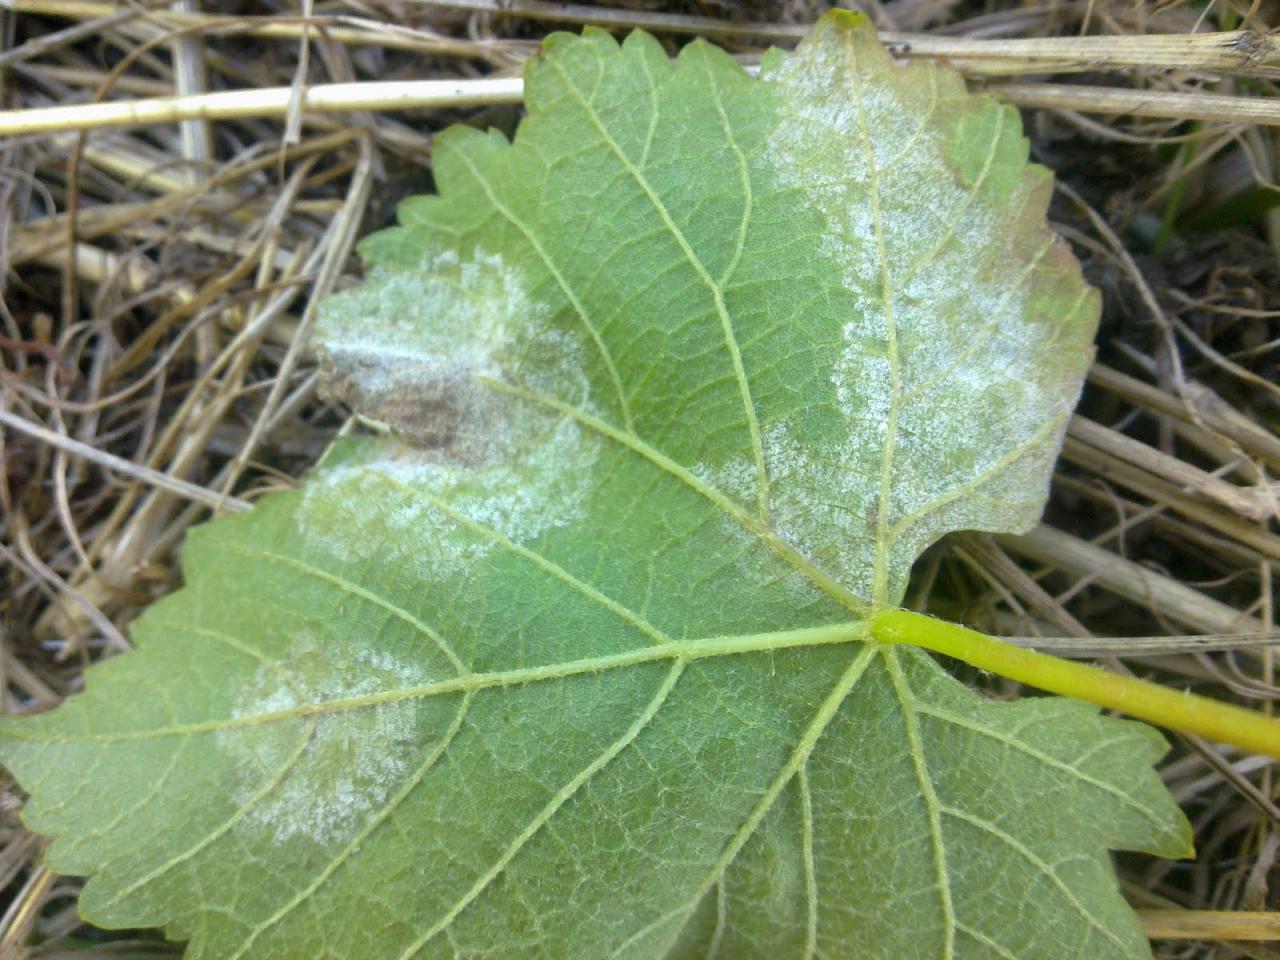 Downy mildew On Passionflower
